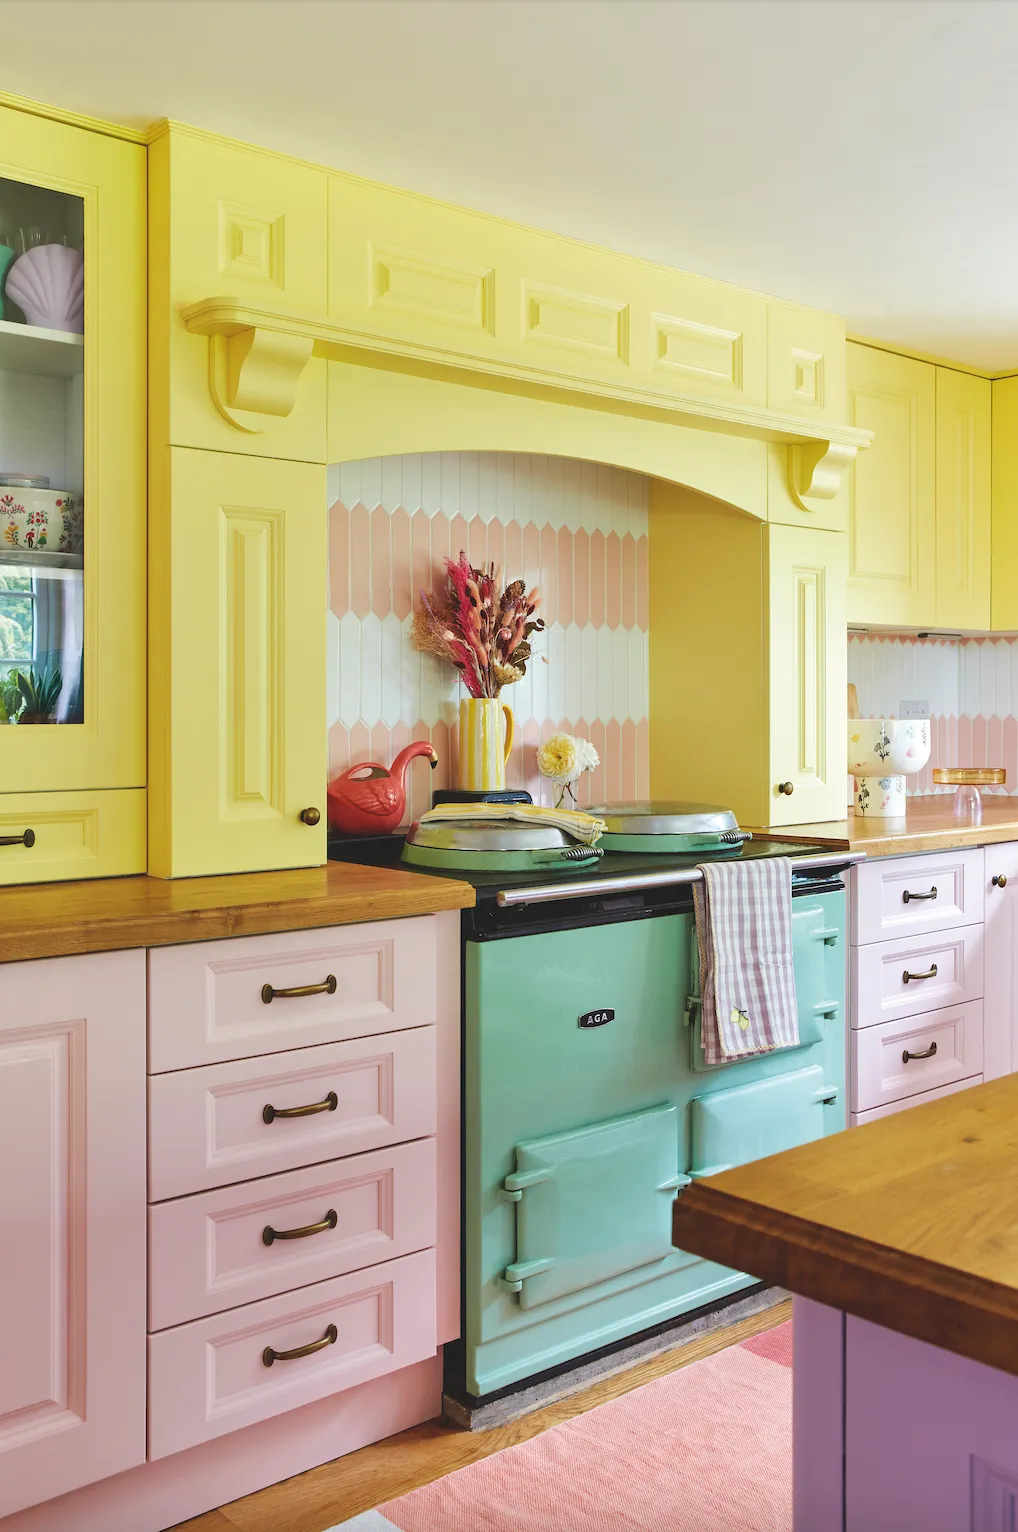 Once upon a time the kitchen units were white, but now this room encompasses all three of Charlotte’s key shades – green, yellow and pink. There’s always the chance it’ll evolve again. ‘I’ve already painted the kitchen twice. I don’t think my house will ever be finished,’ says Charlotte